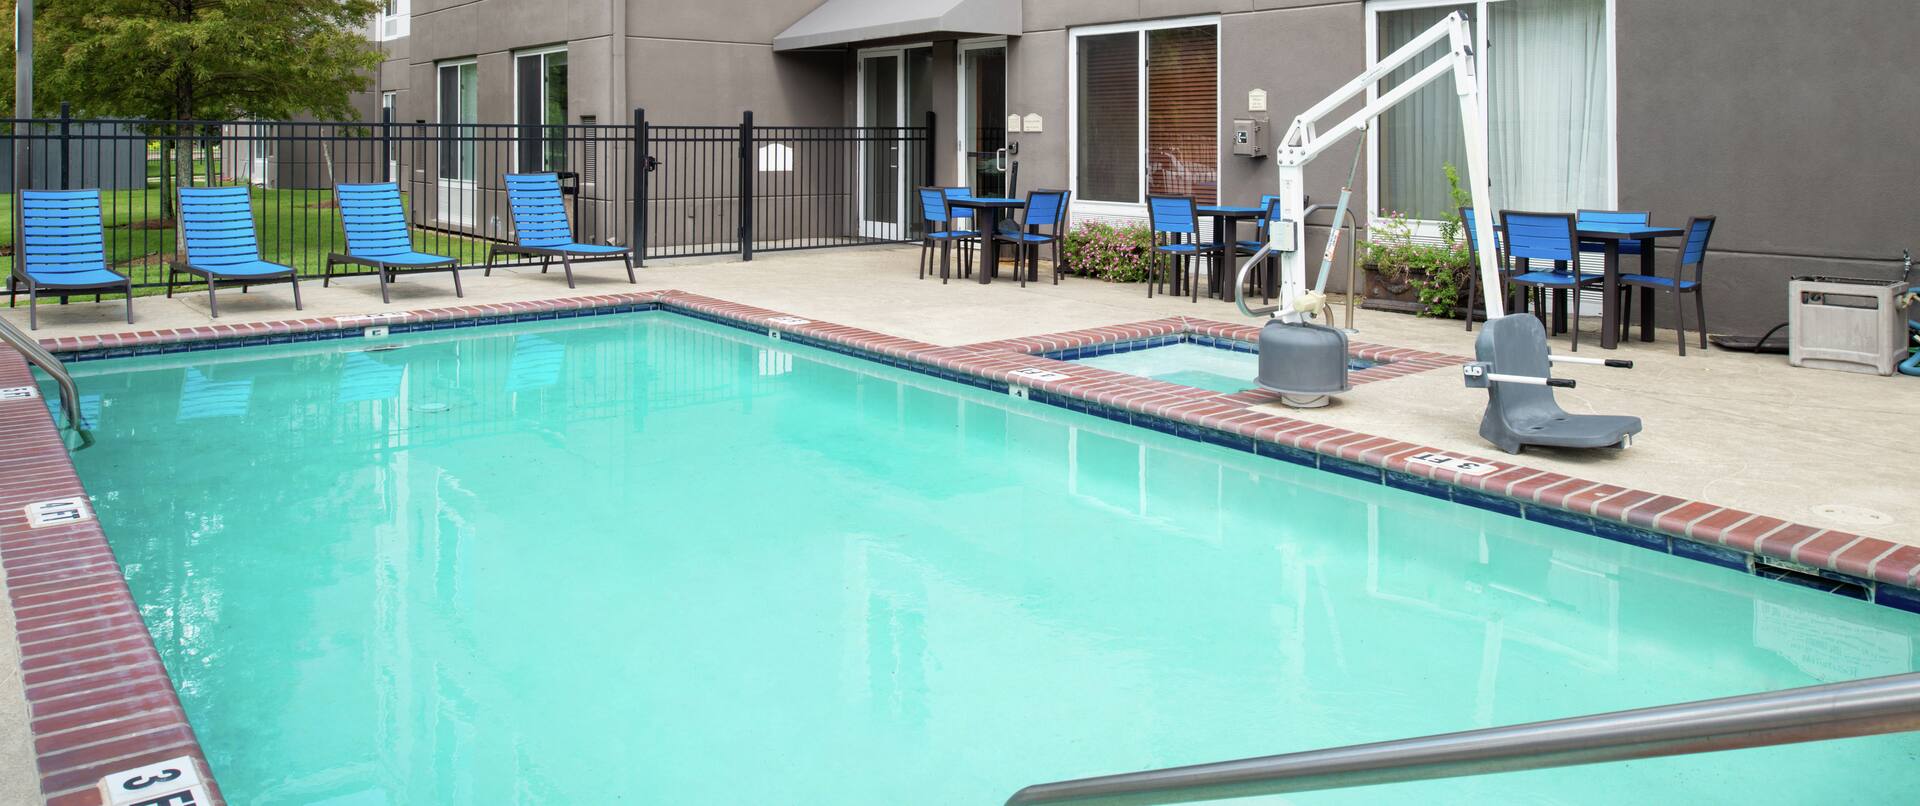 Outdoor Pool with Sitting Area